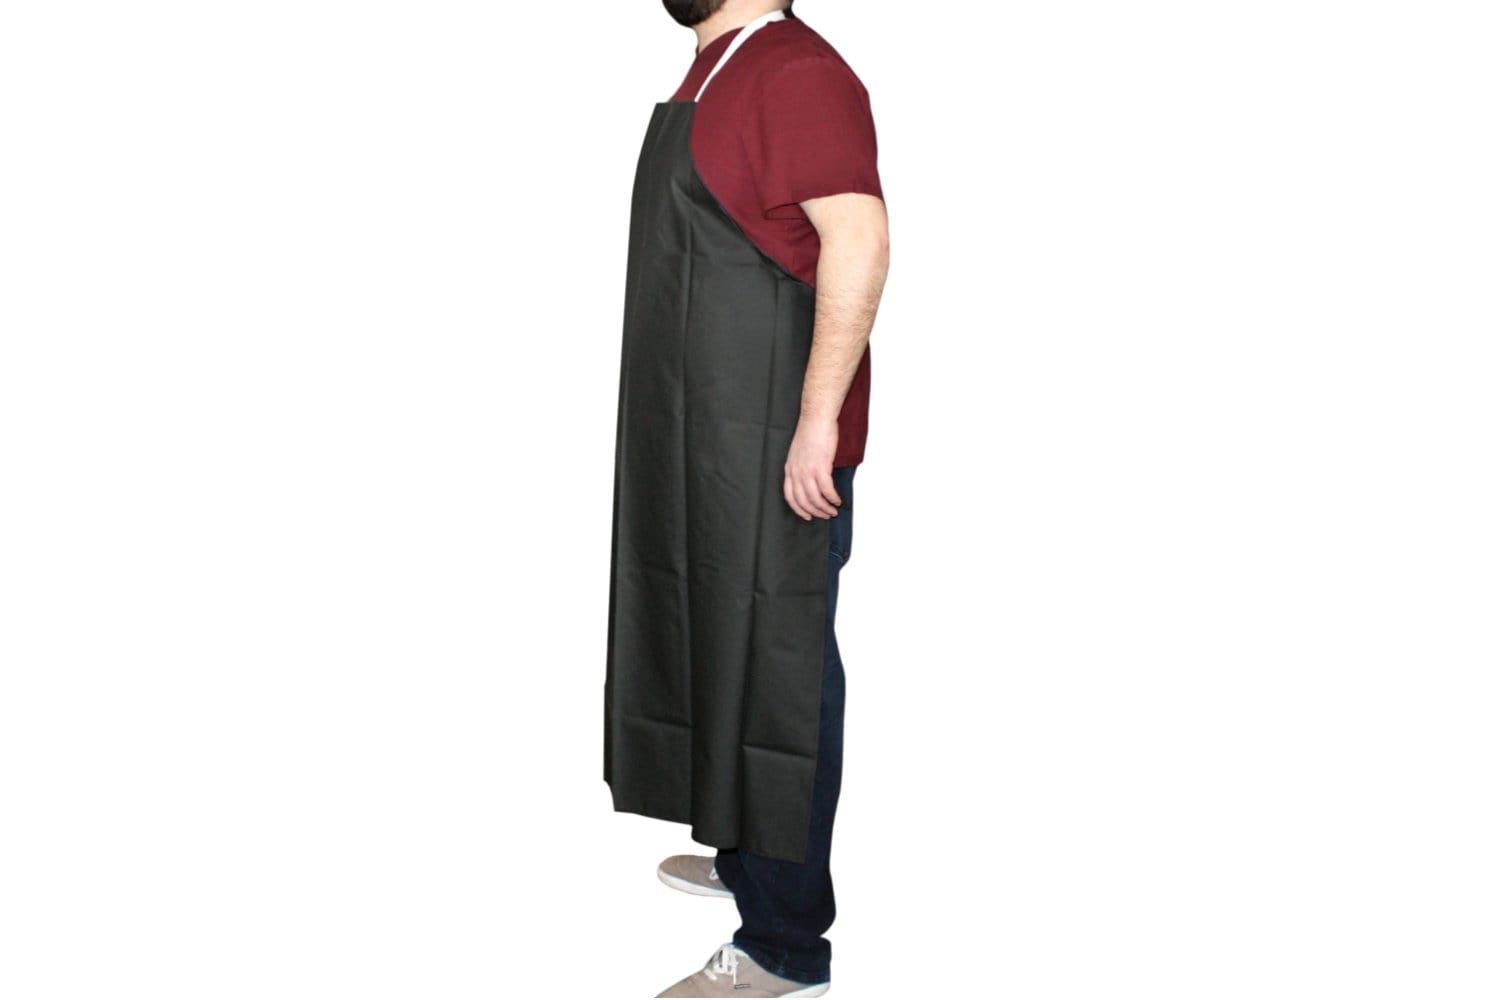 Printmaking Etching Tool Apron for Sale by murialbezanson